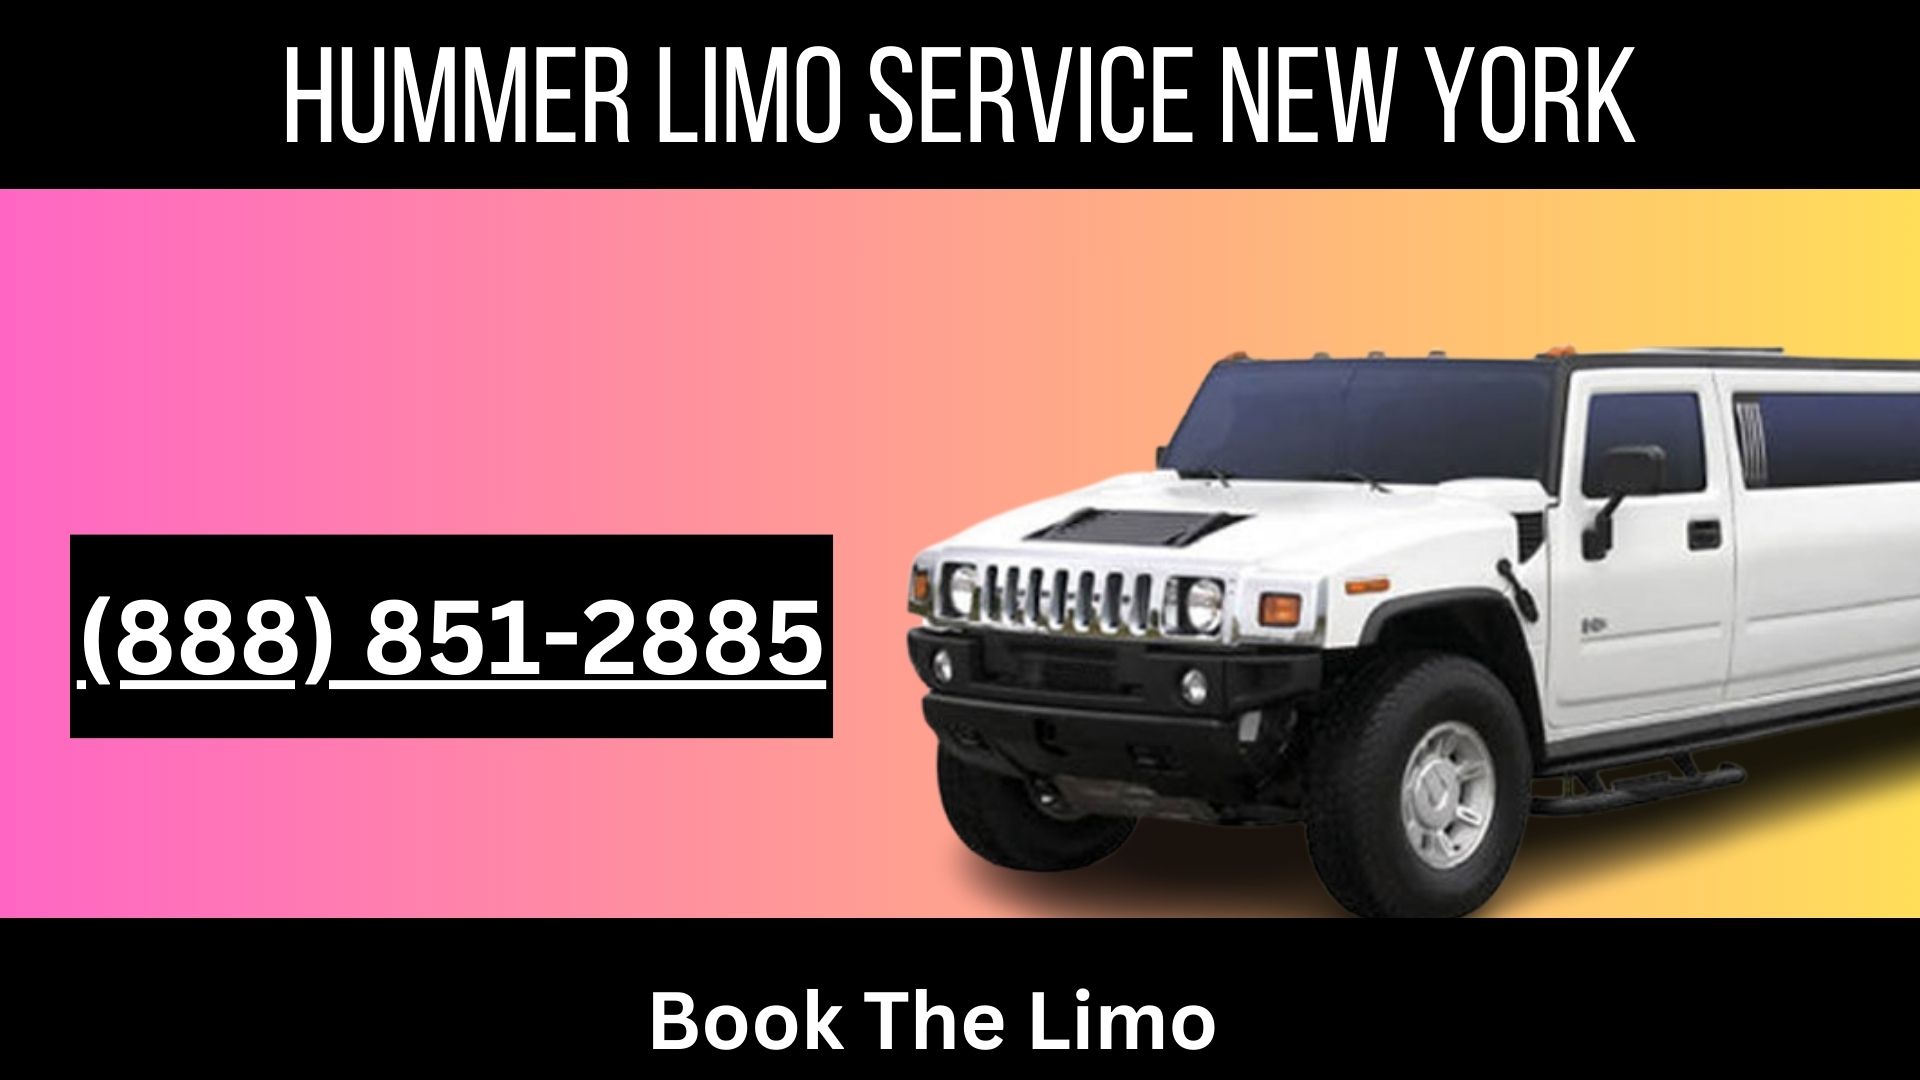 Hummer Limo Service Near Me